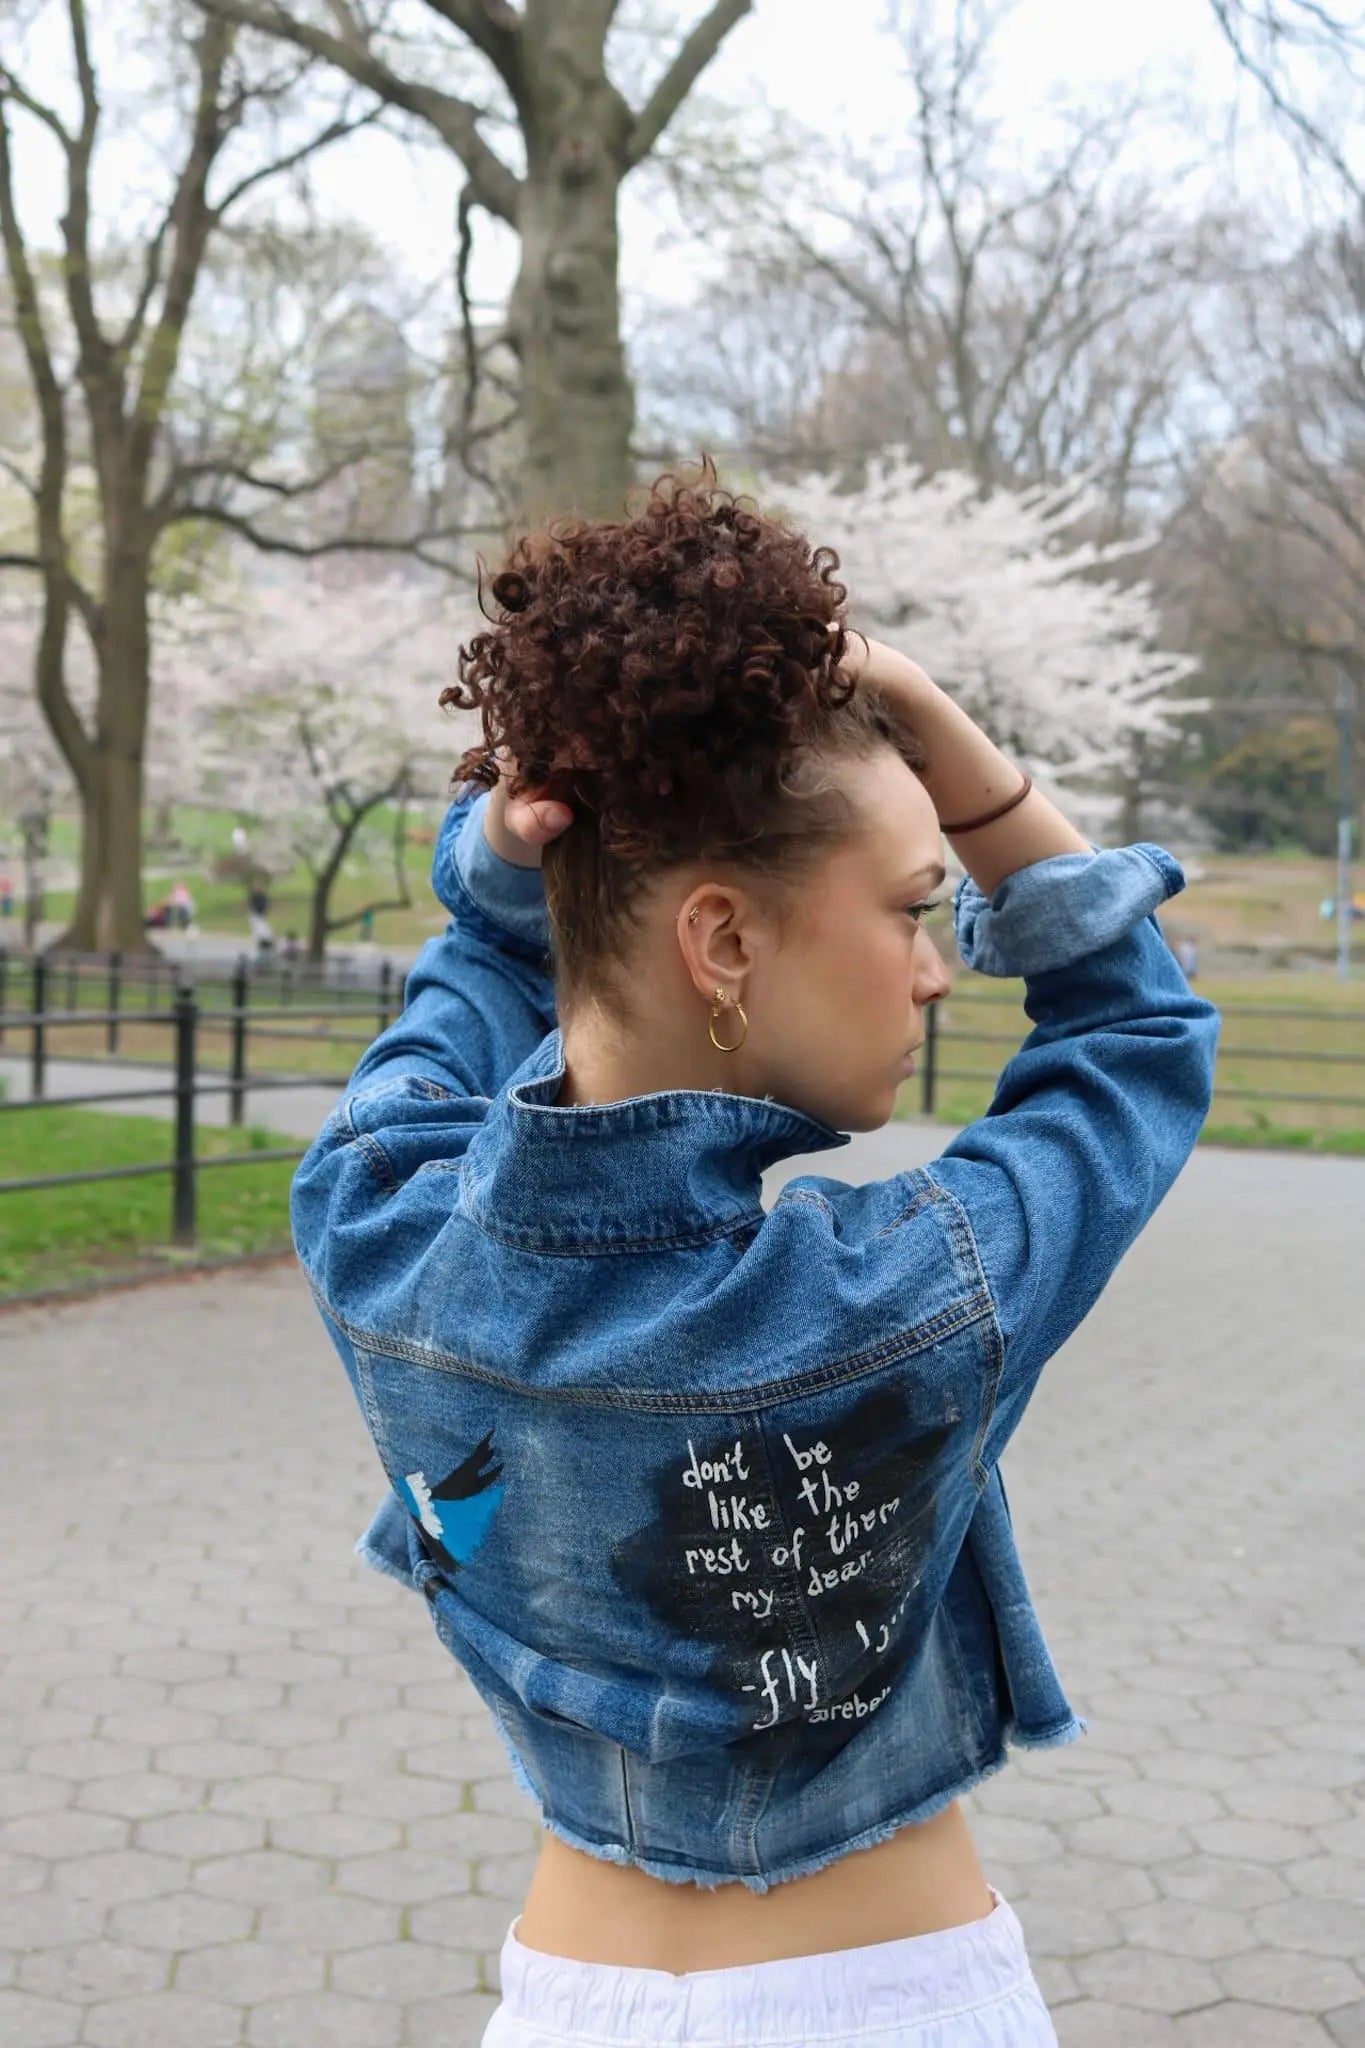 FLY HIGH Painted Jean Jacket - Rebelle Theory